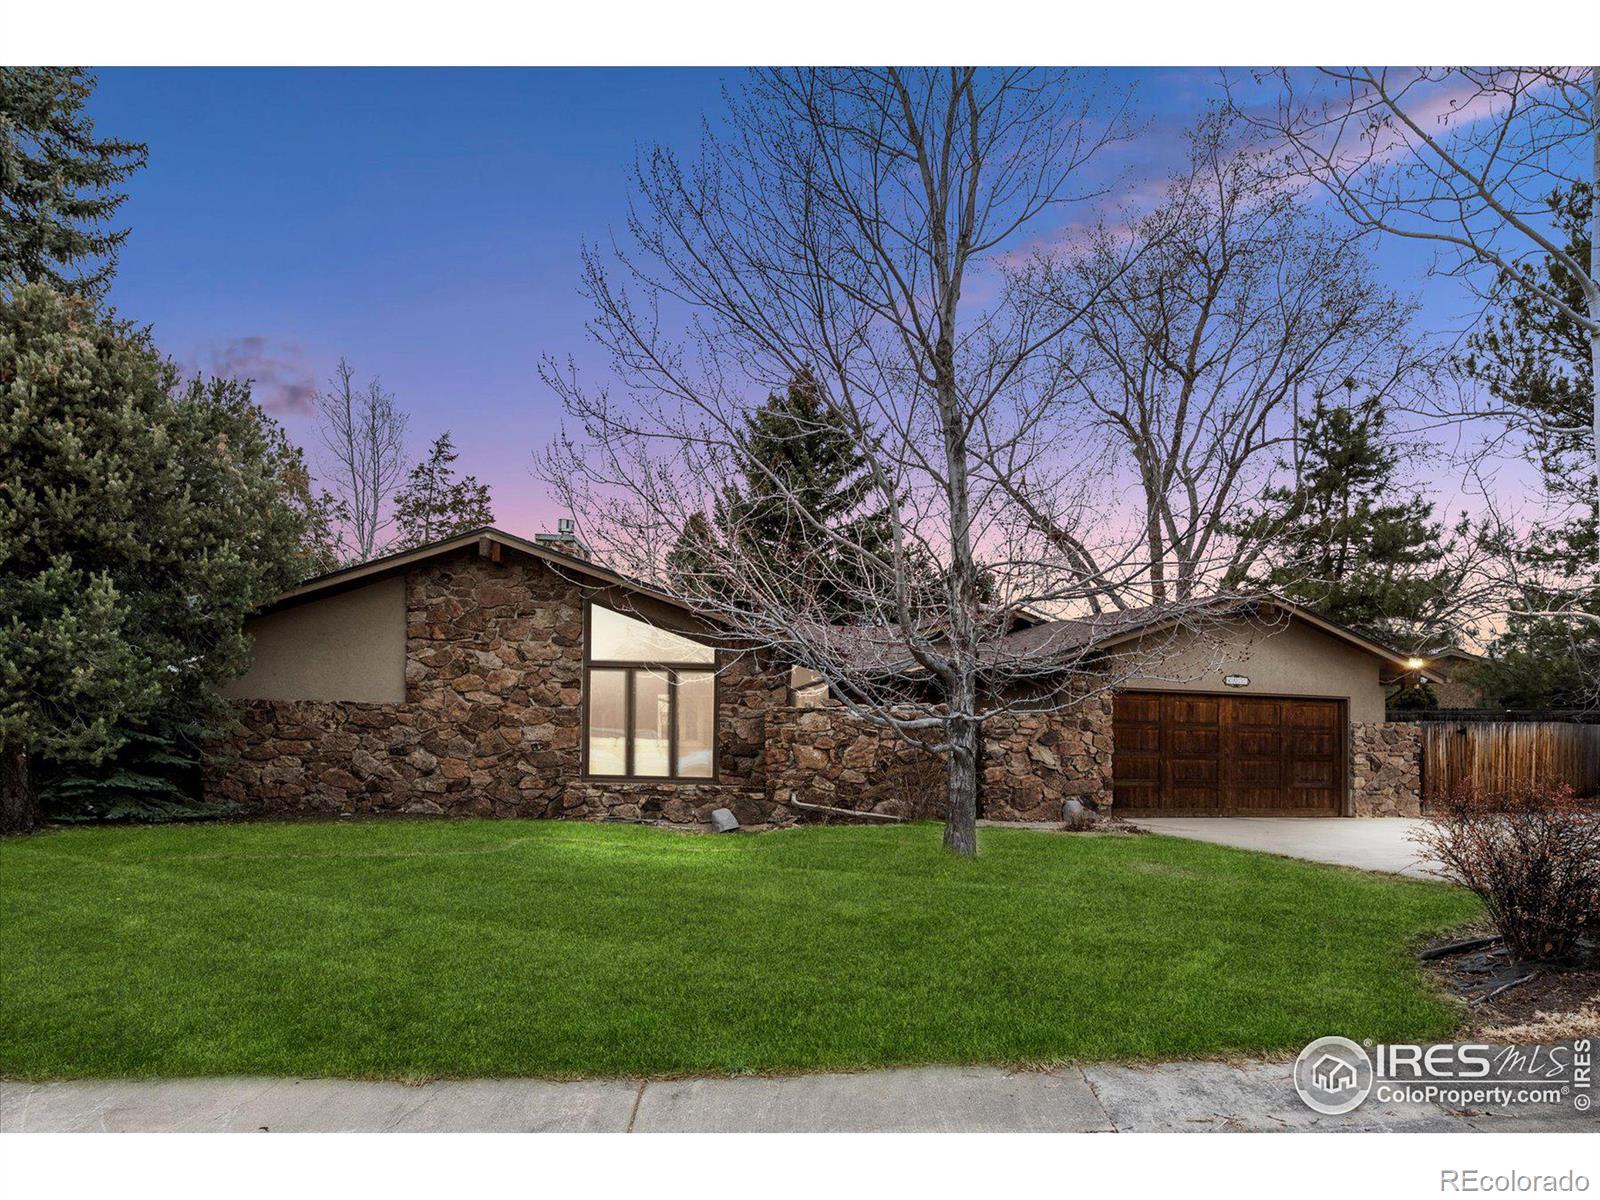 4577  tanglewood trail, boulder sold home. Closed on 2024-04-25 for $1,030,000.